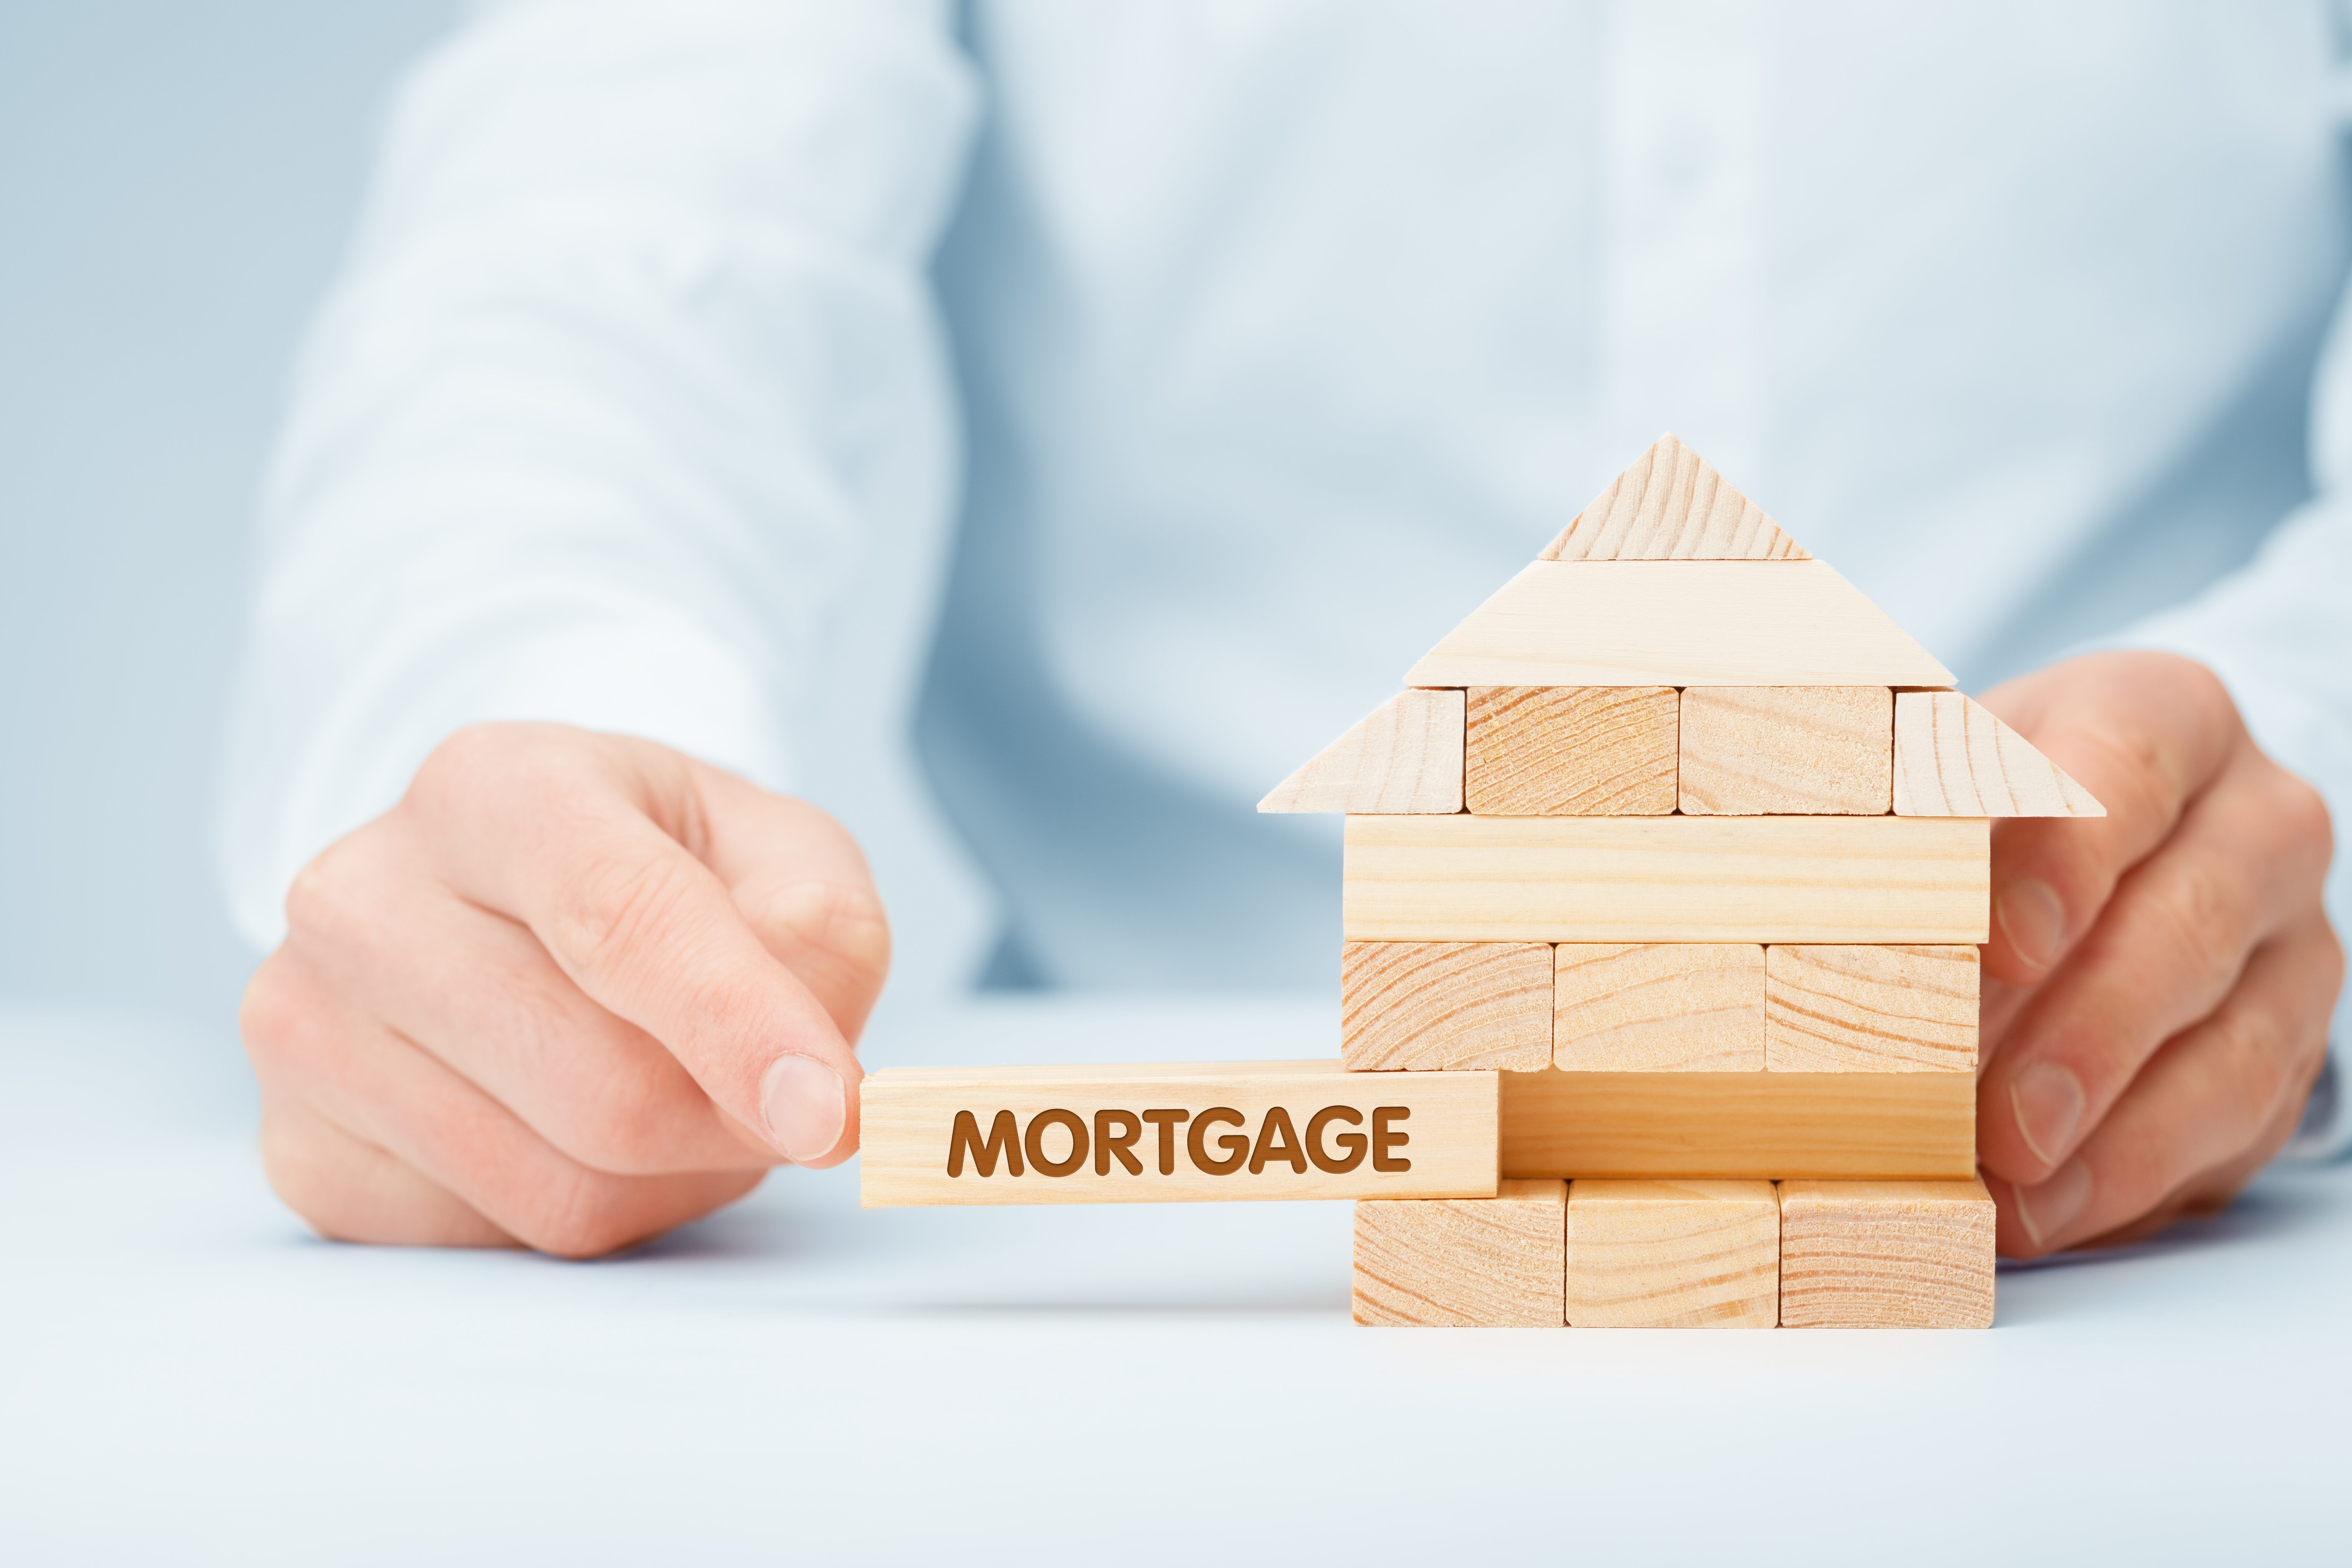 Fixed Rate vs. Adjustable Rate Mortgages